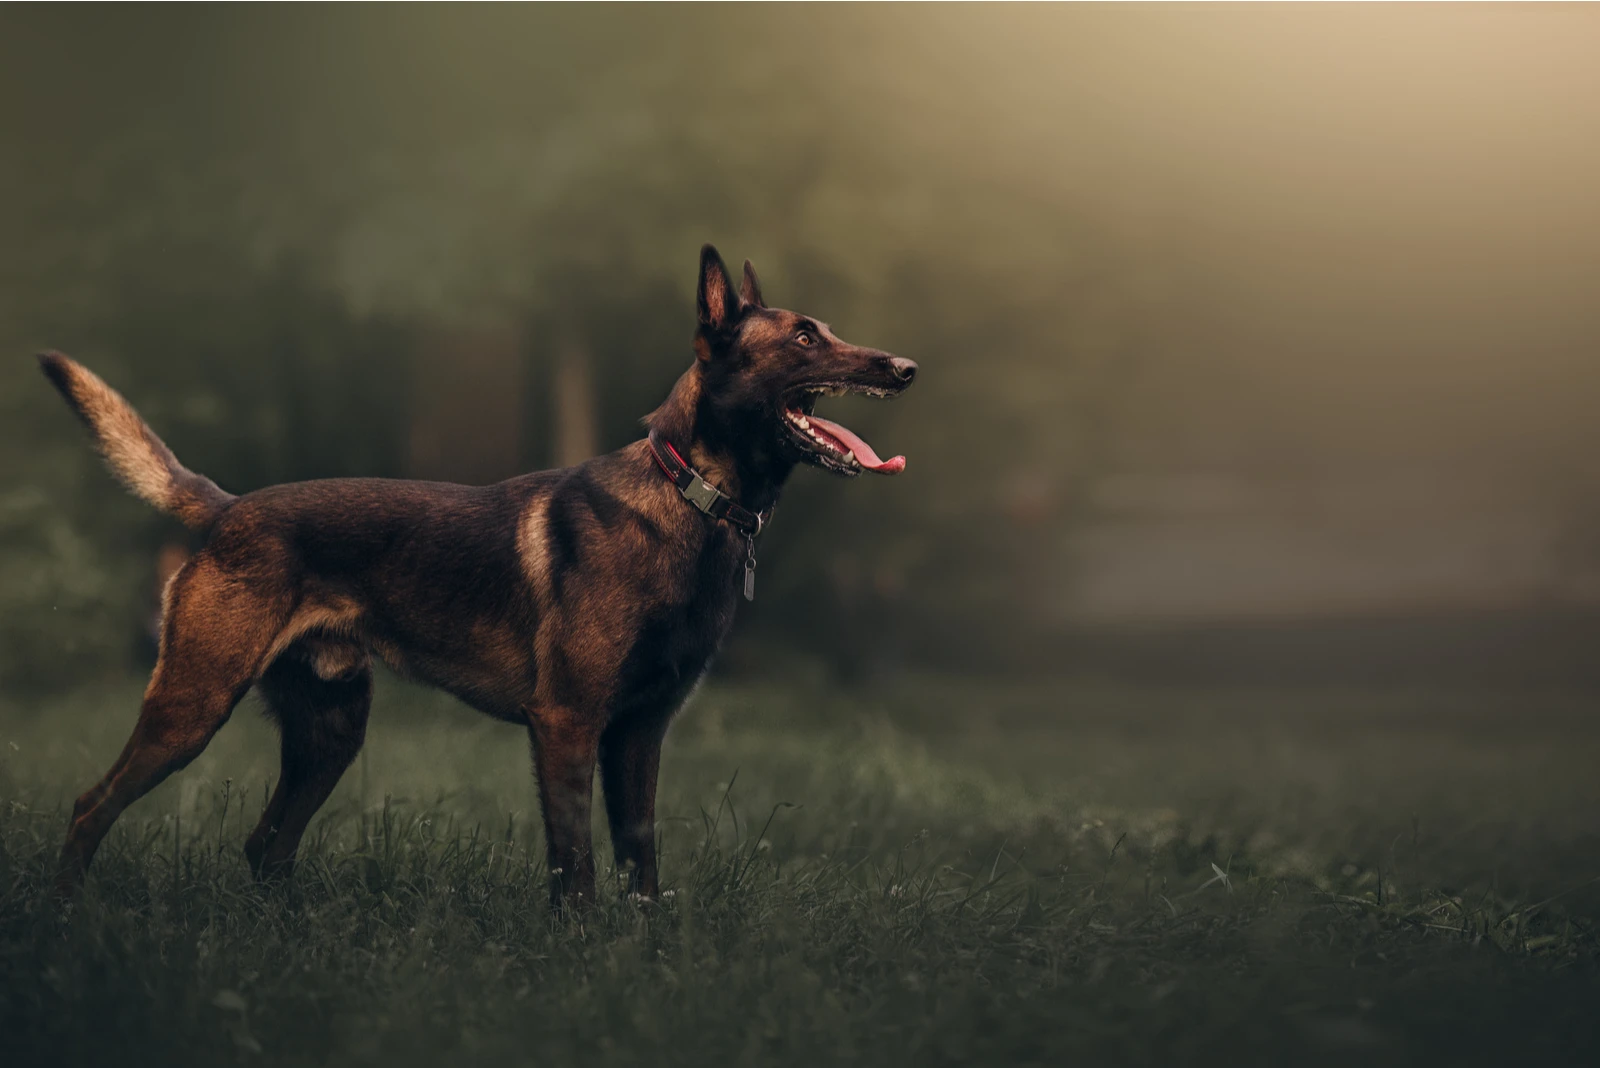 The Belgian Malinois side view